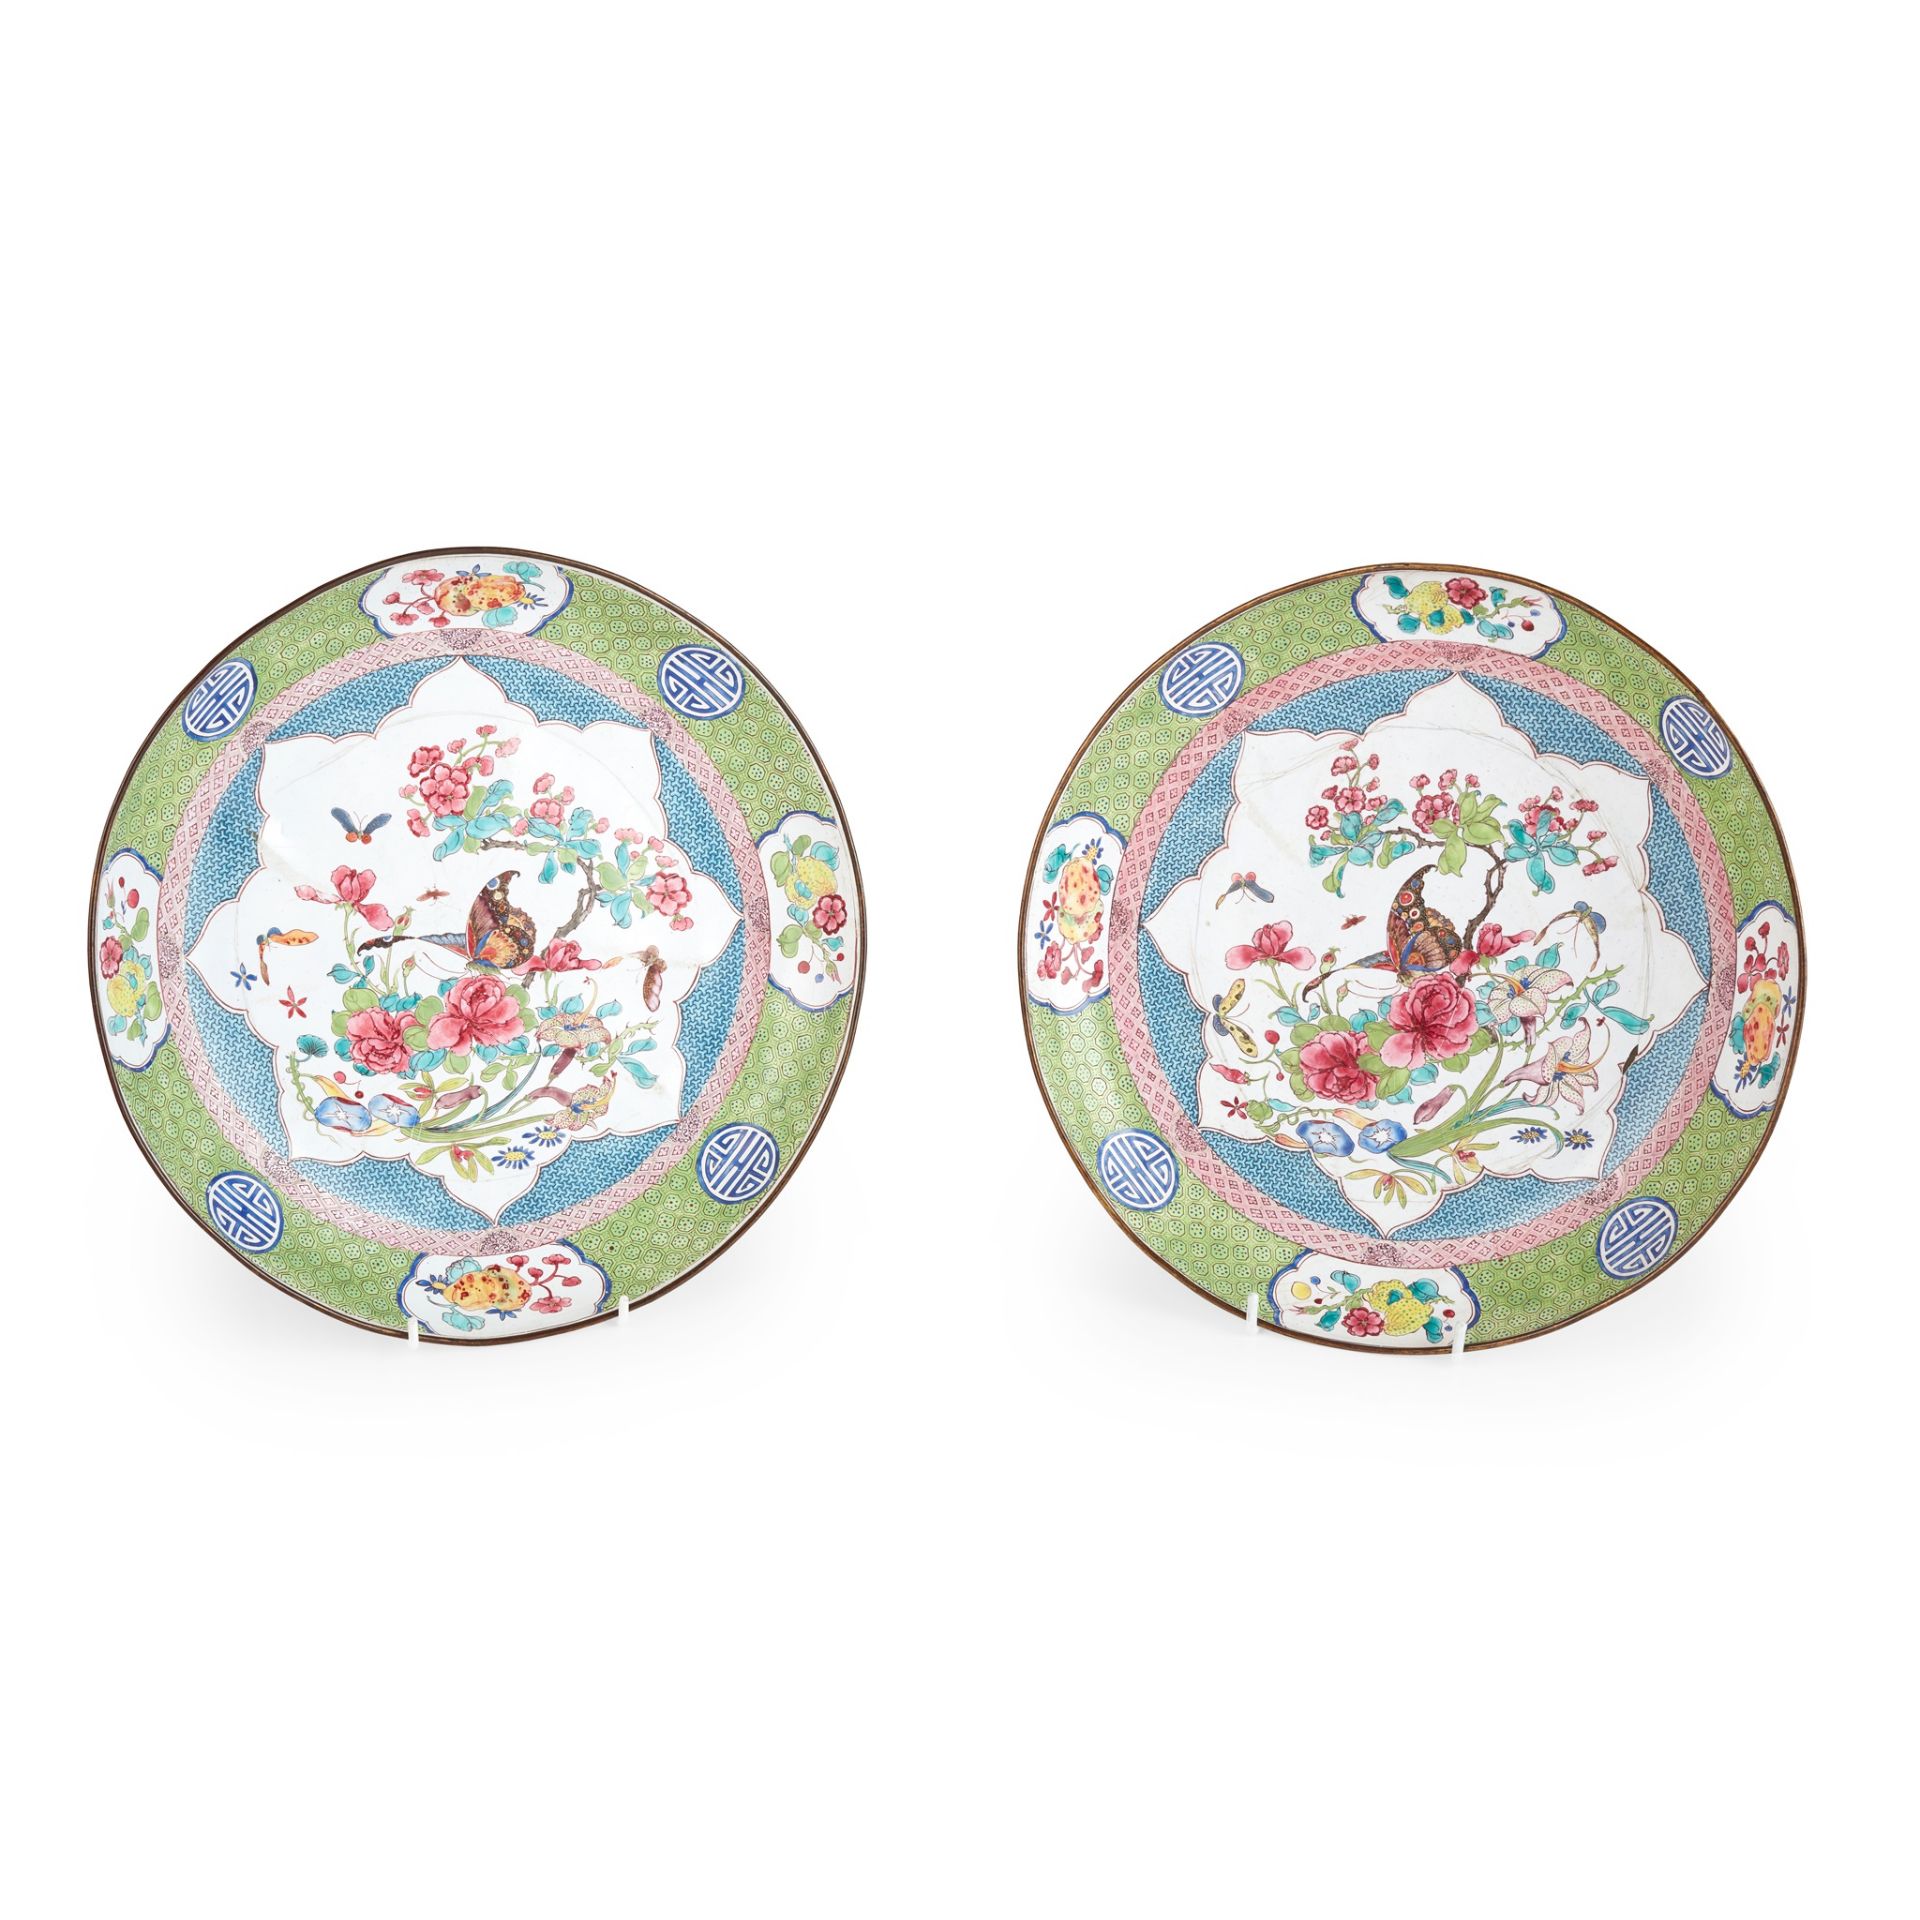 PAIR OF PAINTED CANTON ENAMEL 'FLOWERS AND BUTTERFLIES' PLATES QING DYNASTY, 19TH CENTURY